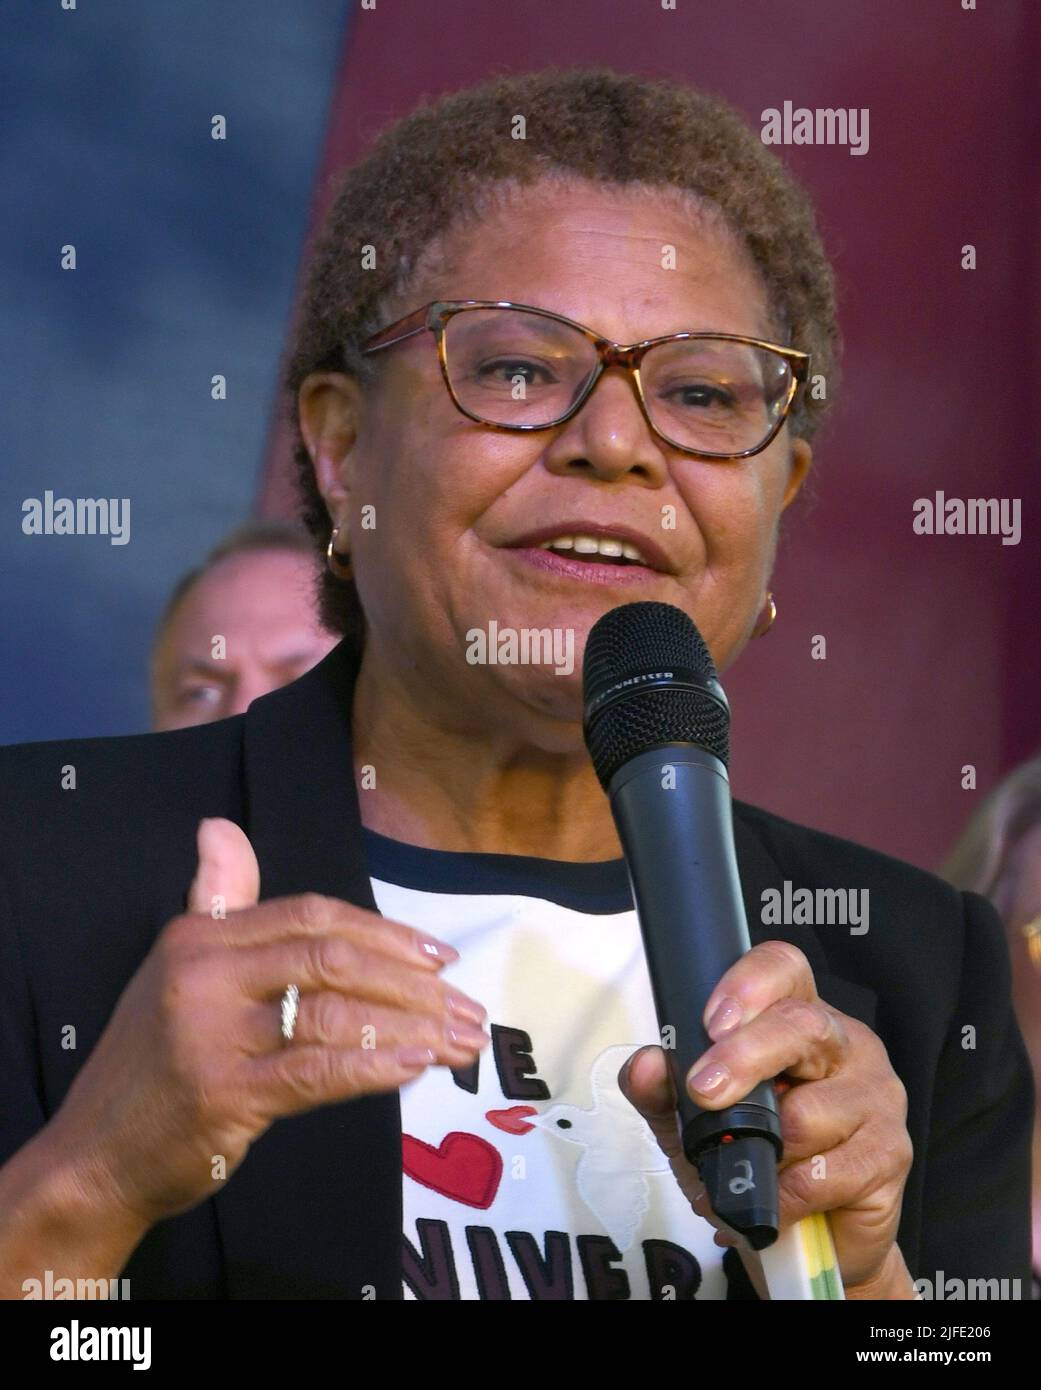 Los Angeles, USA. 01st July, 2022. LA Mayor Candidate Karen Bass attends the 2022 South LA Pride Community Picnic at the Norman O. Houston Park in Los Angeles, USAlifornia on July 1, 2022 Credit: Koi Sojer/Snap'n U Photos/Media Punch/Alamy Live News Stock Photo